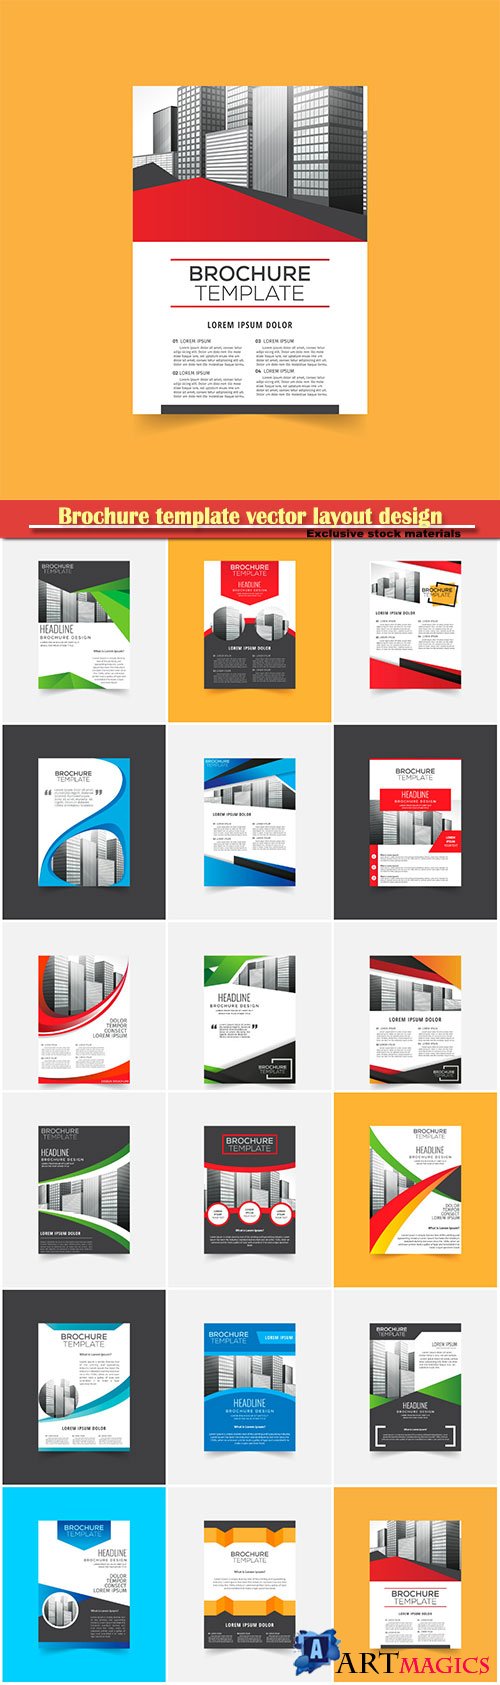 Brochure template vector layout design, corporate business annual report, magazine, flyer mockup # 110